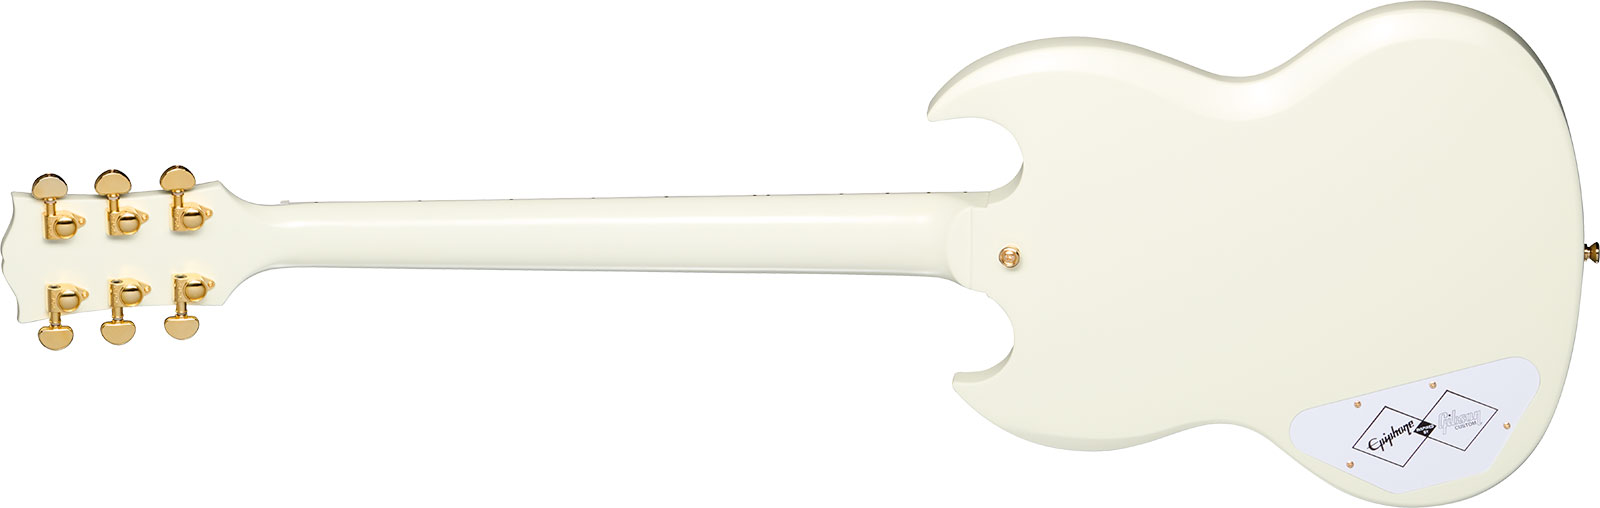 Epiphone Sg Les Paul Custom 1963 Maestro Vibrola Inspired By 2h Trem Eb - Vos Classic White - Double cut electric guitar - Variation 1